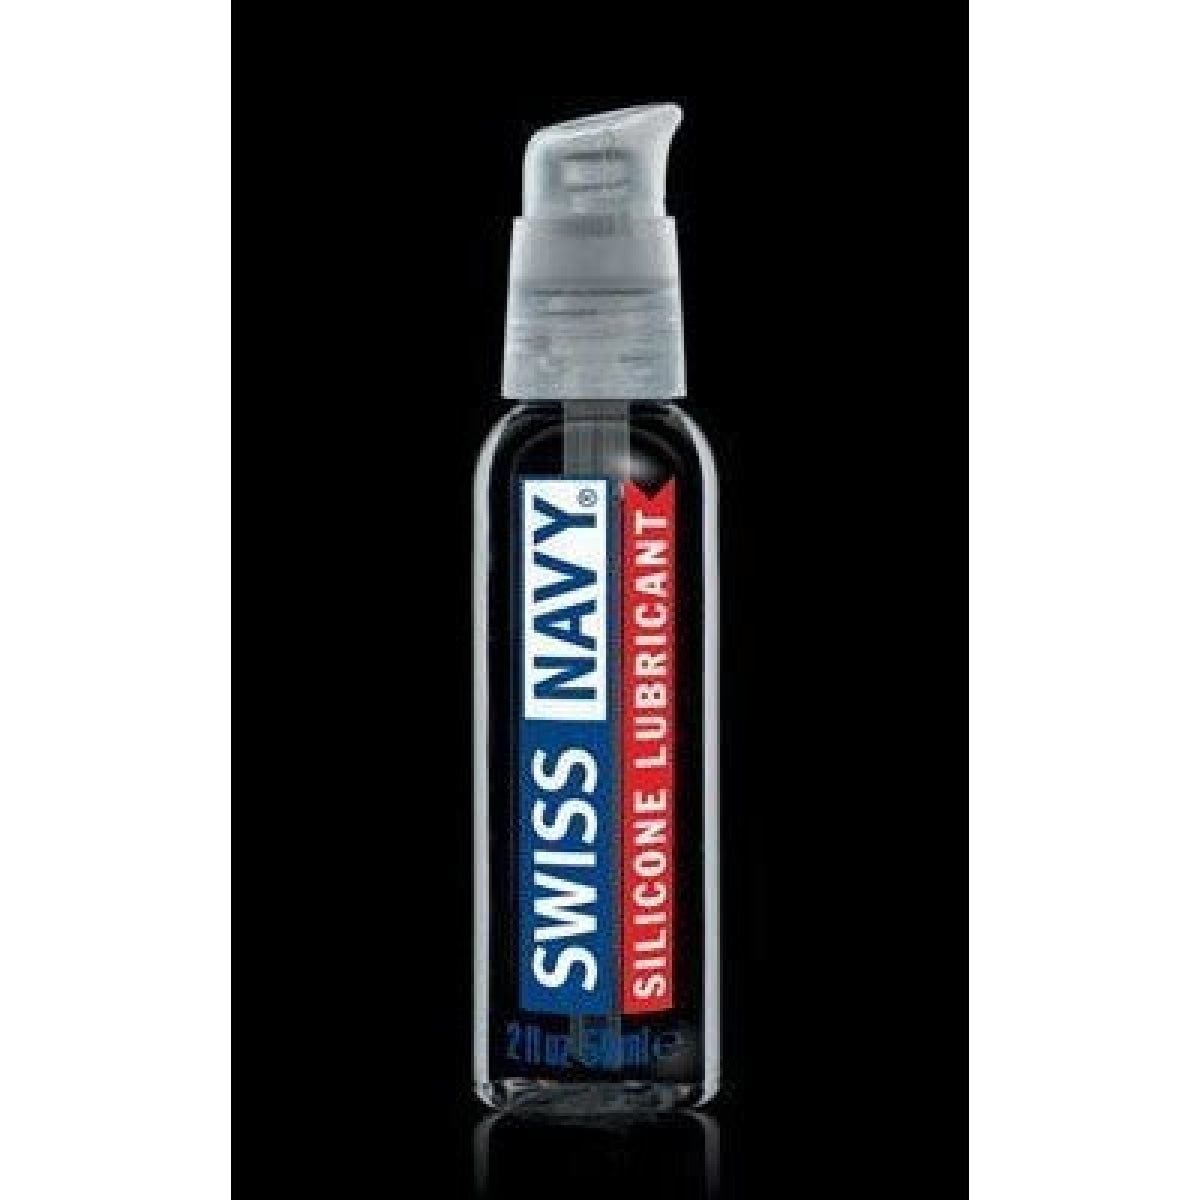 Swiss Navy Silicone Lube 2 Oz Intimates Adult Boutique